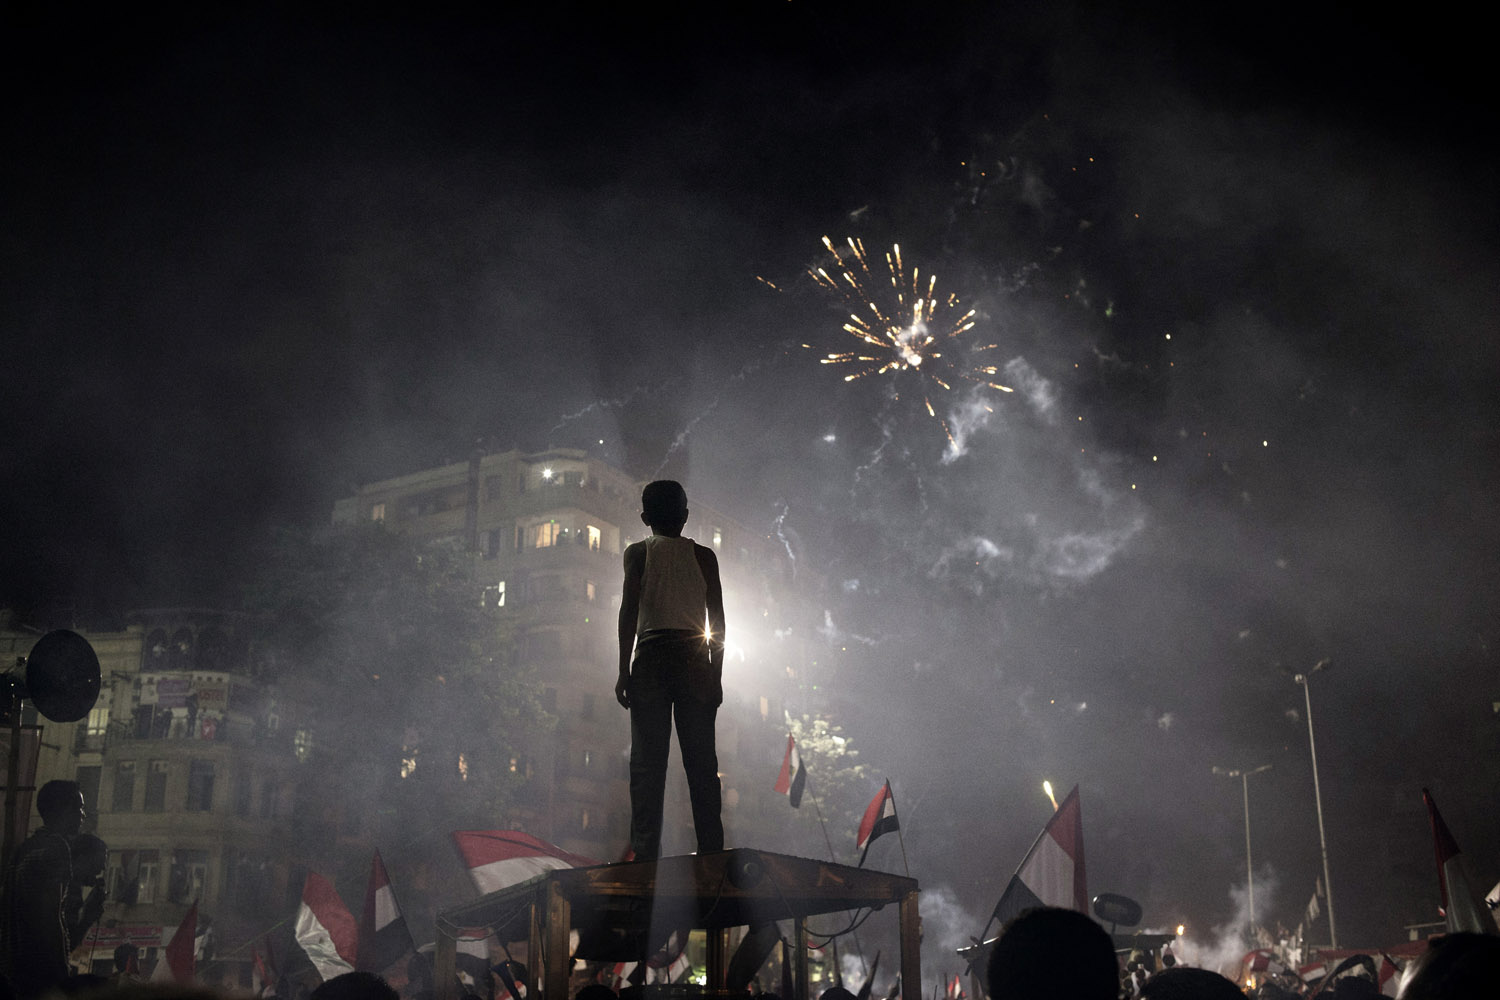 Massive demonstrations turned to celebration in and around Tahrir Square, Cairo, Egypt, July 3, 2013, as Egyptian President Mohamed Morsi was ousted by the military and taken into custody. Photograph by Yuri Kozyrev—NOOR for TIME